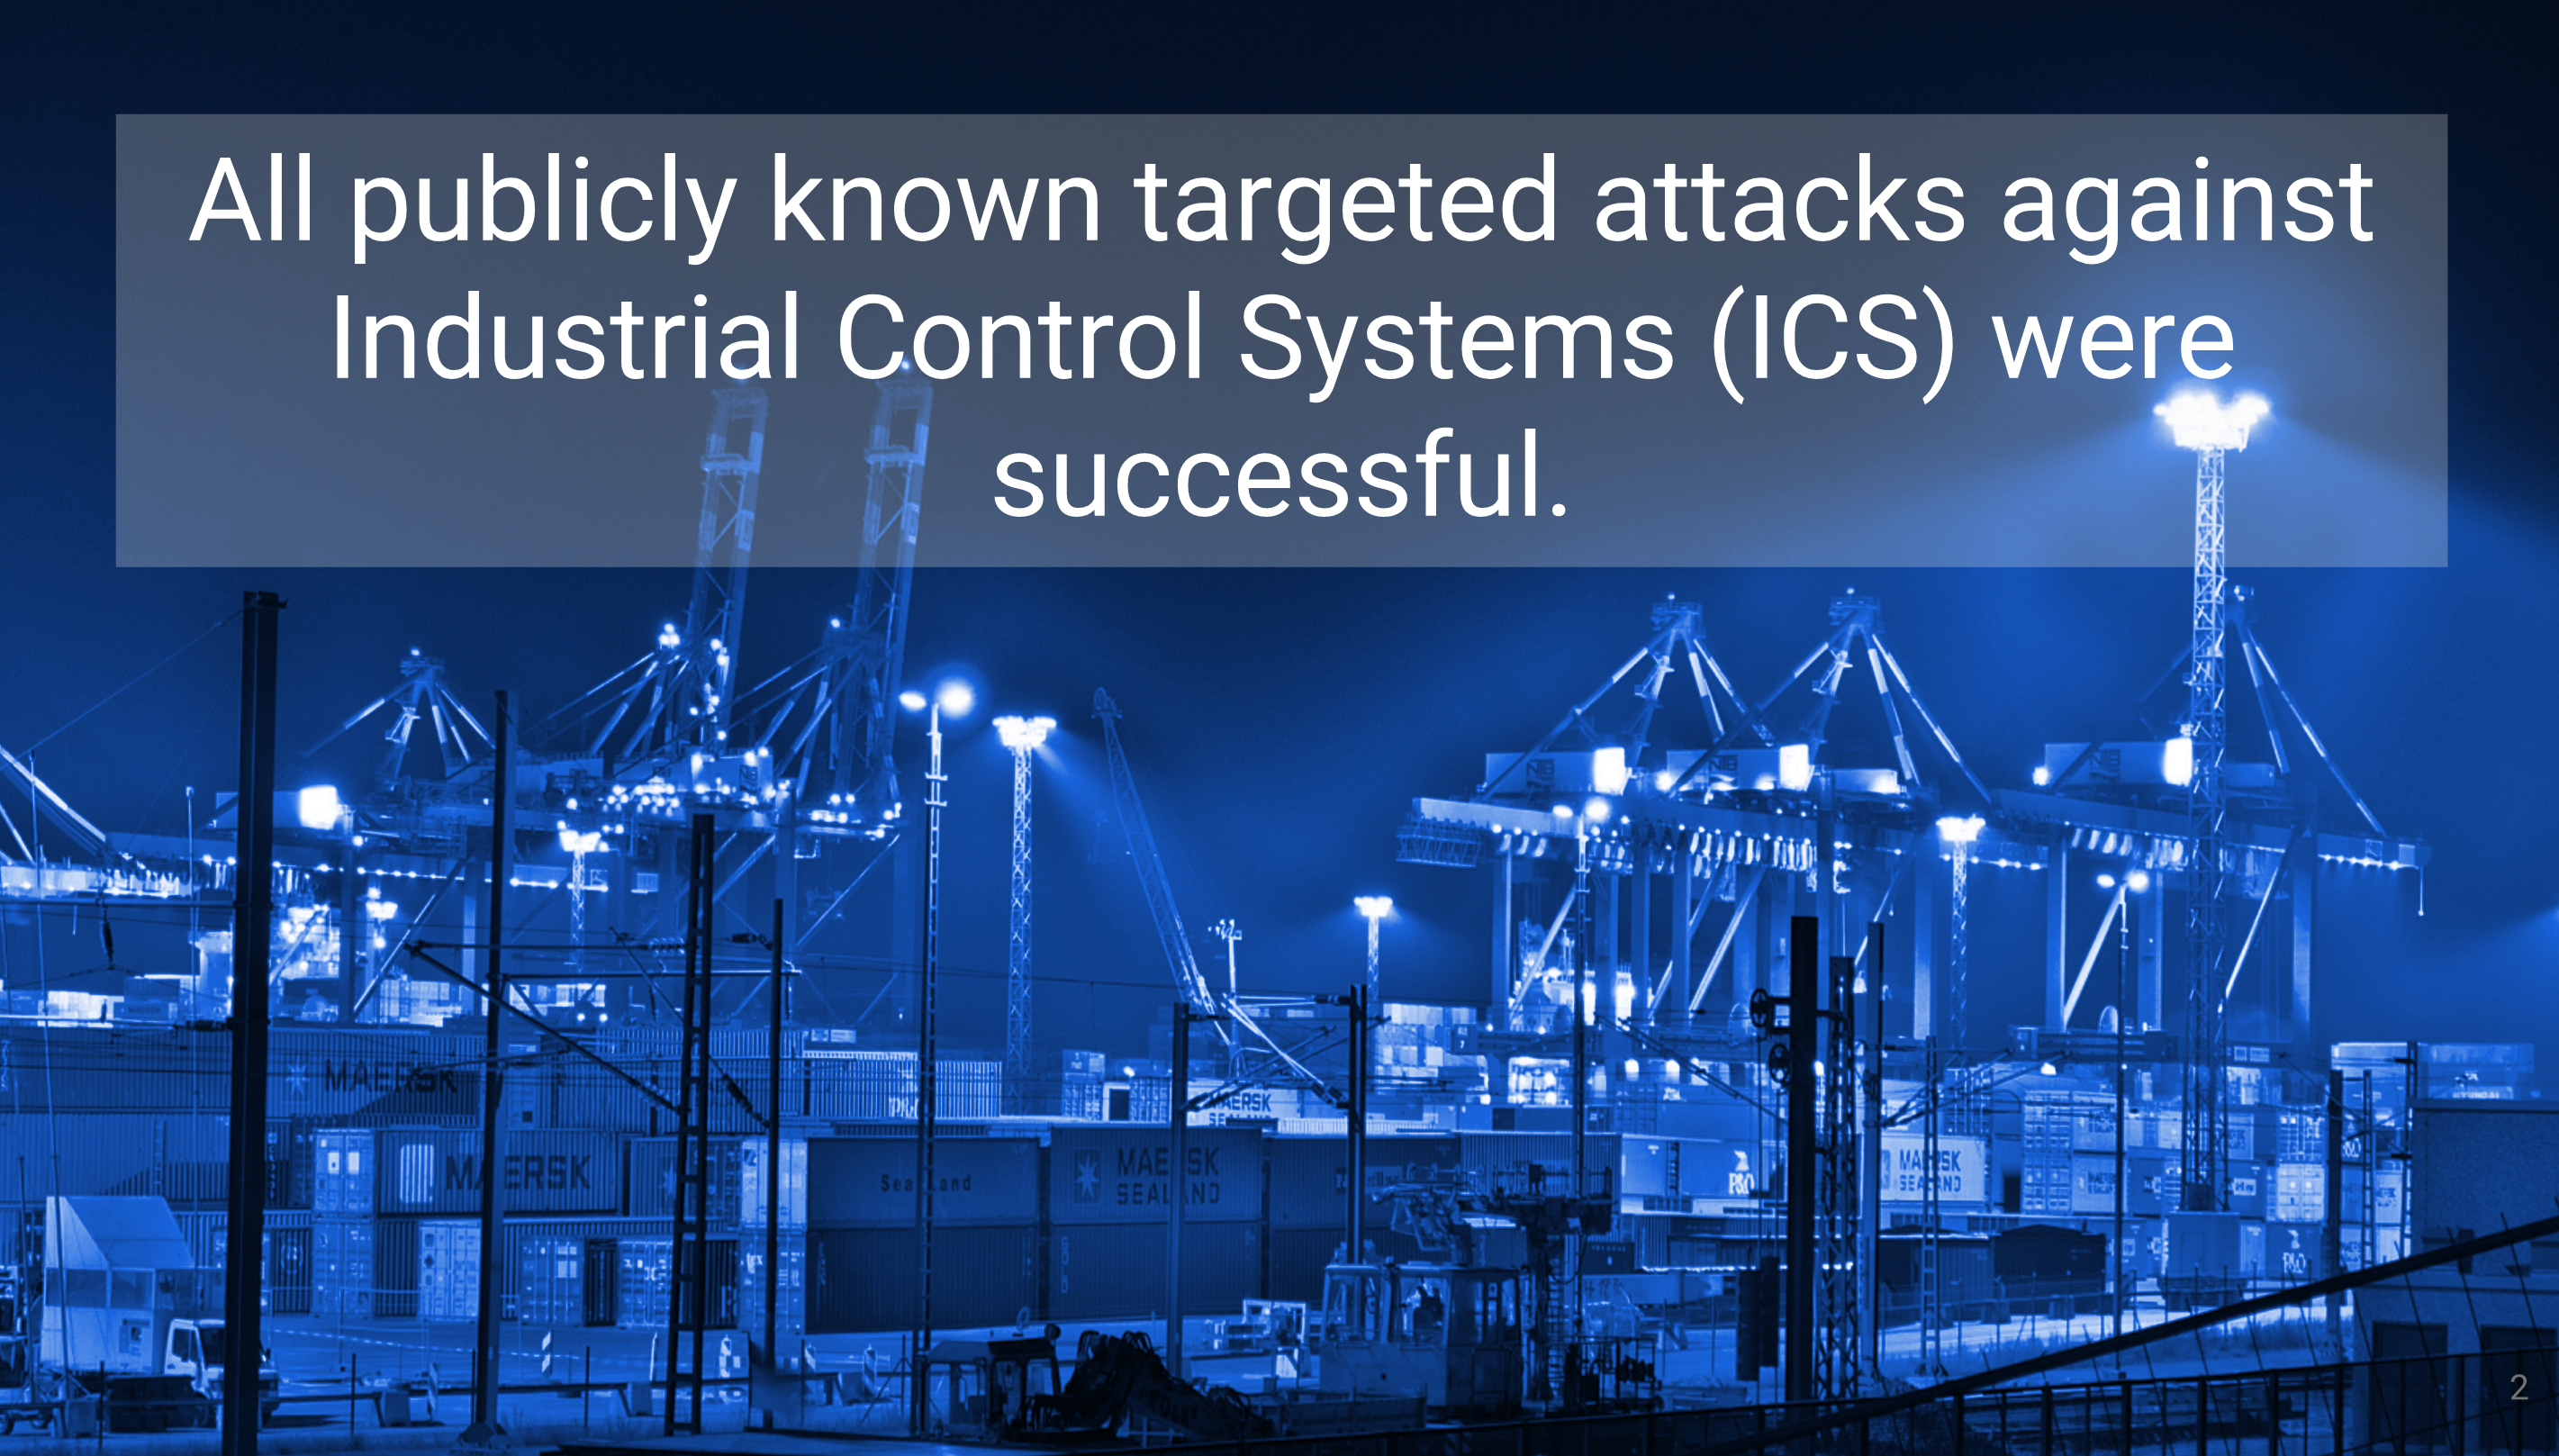 All publicly known targeted attacks against Industrial Control Systems (ICS) were successful.